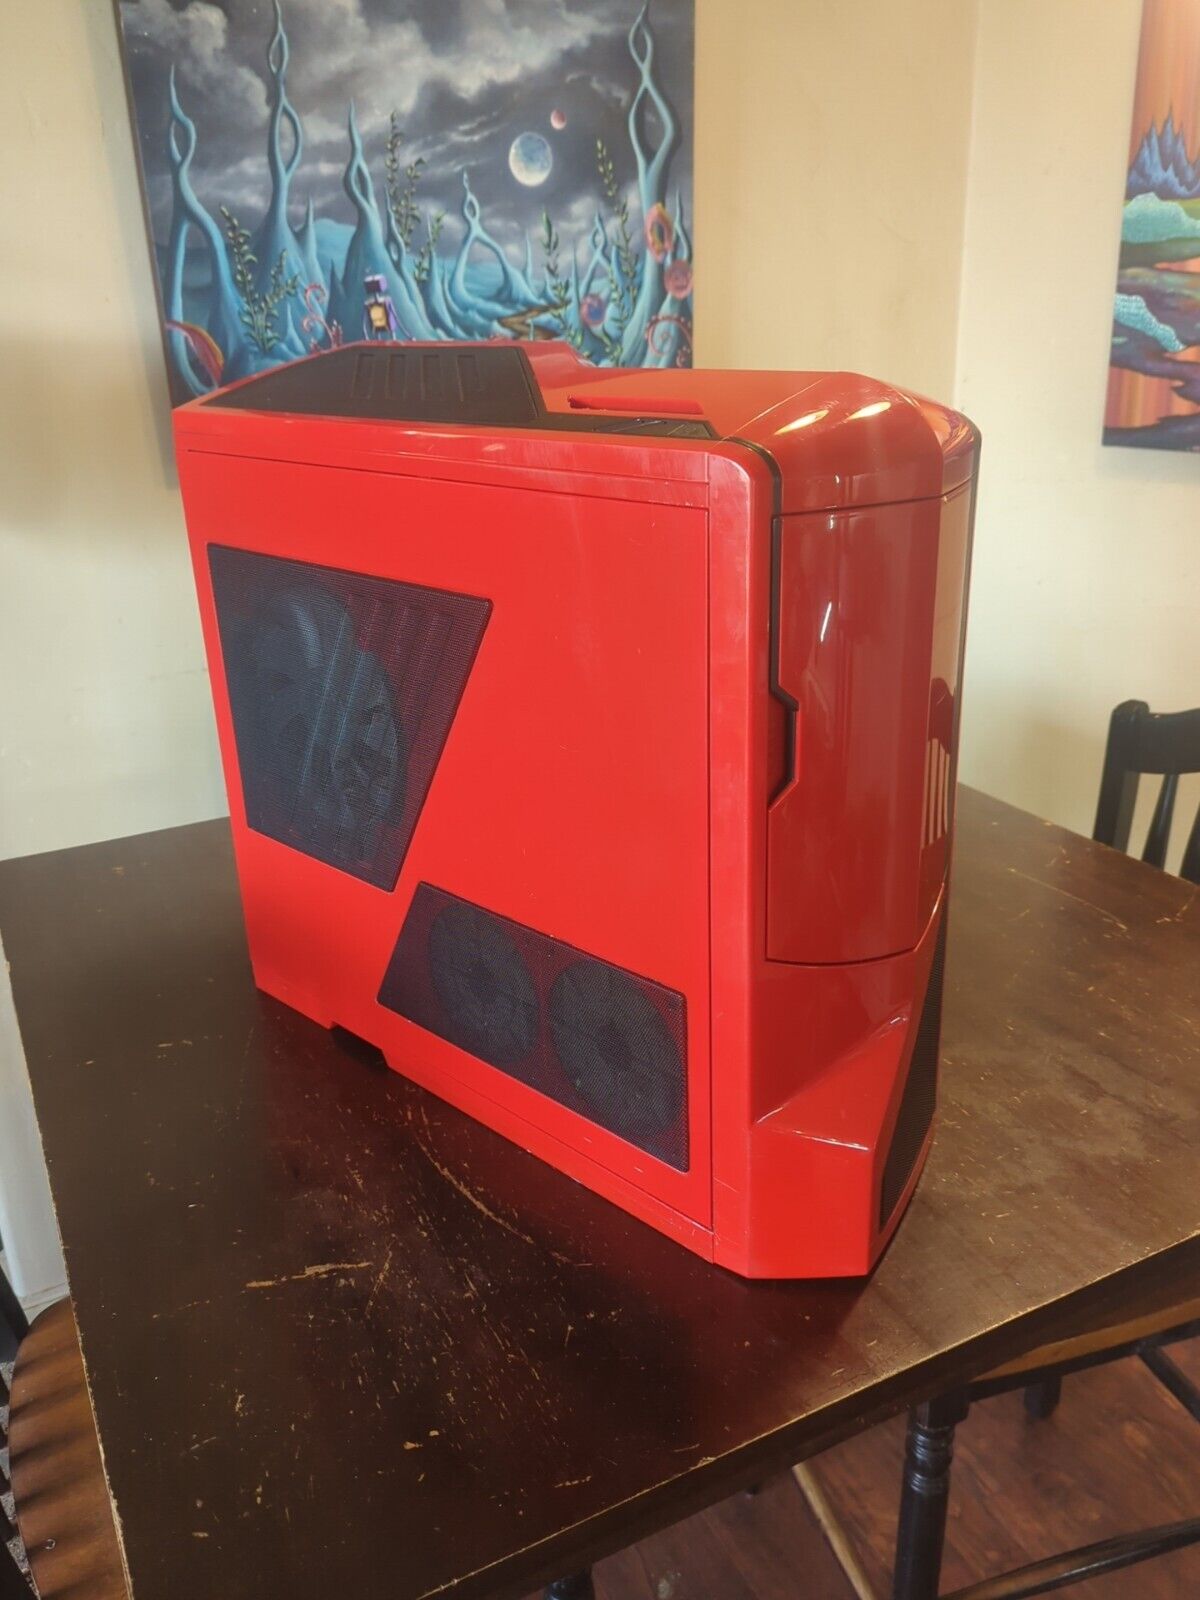 NZXT Phantom 410 ATX Tower PC Case Red Old School Gaming Computer Chassis 